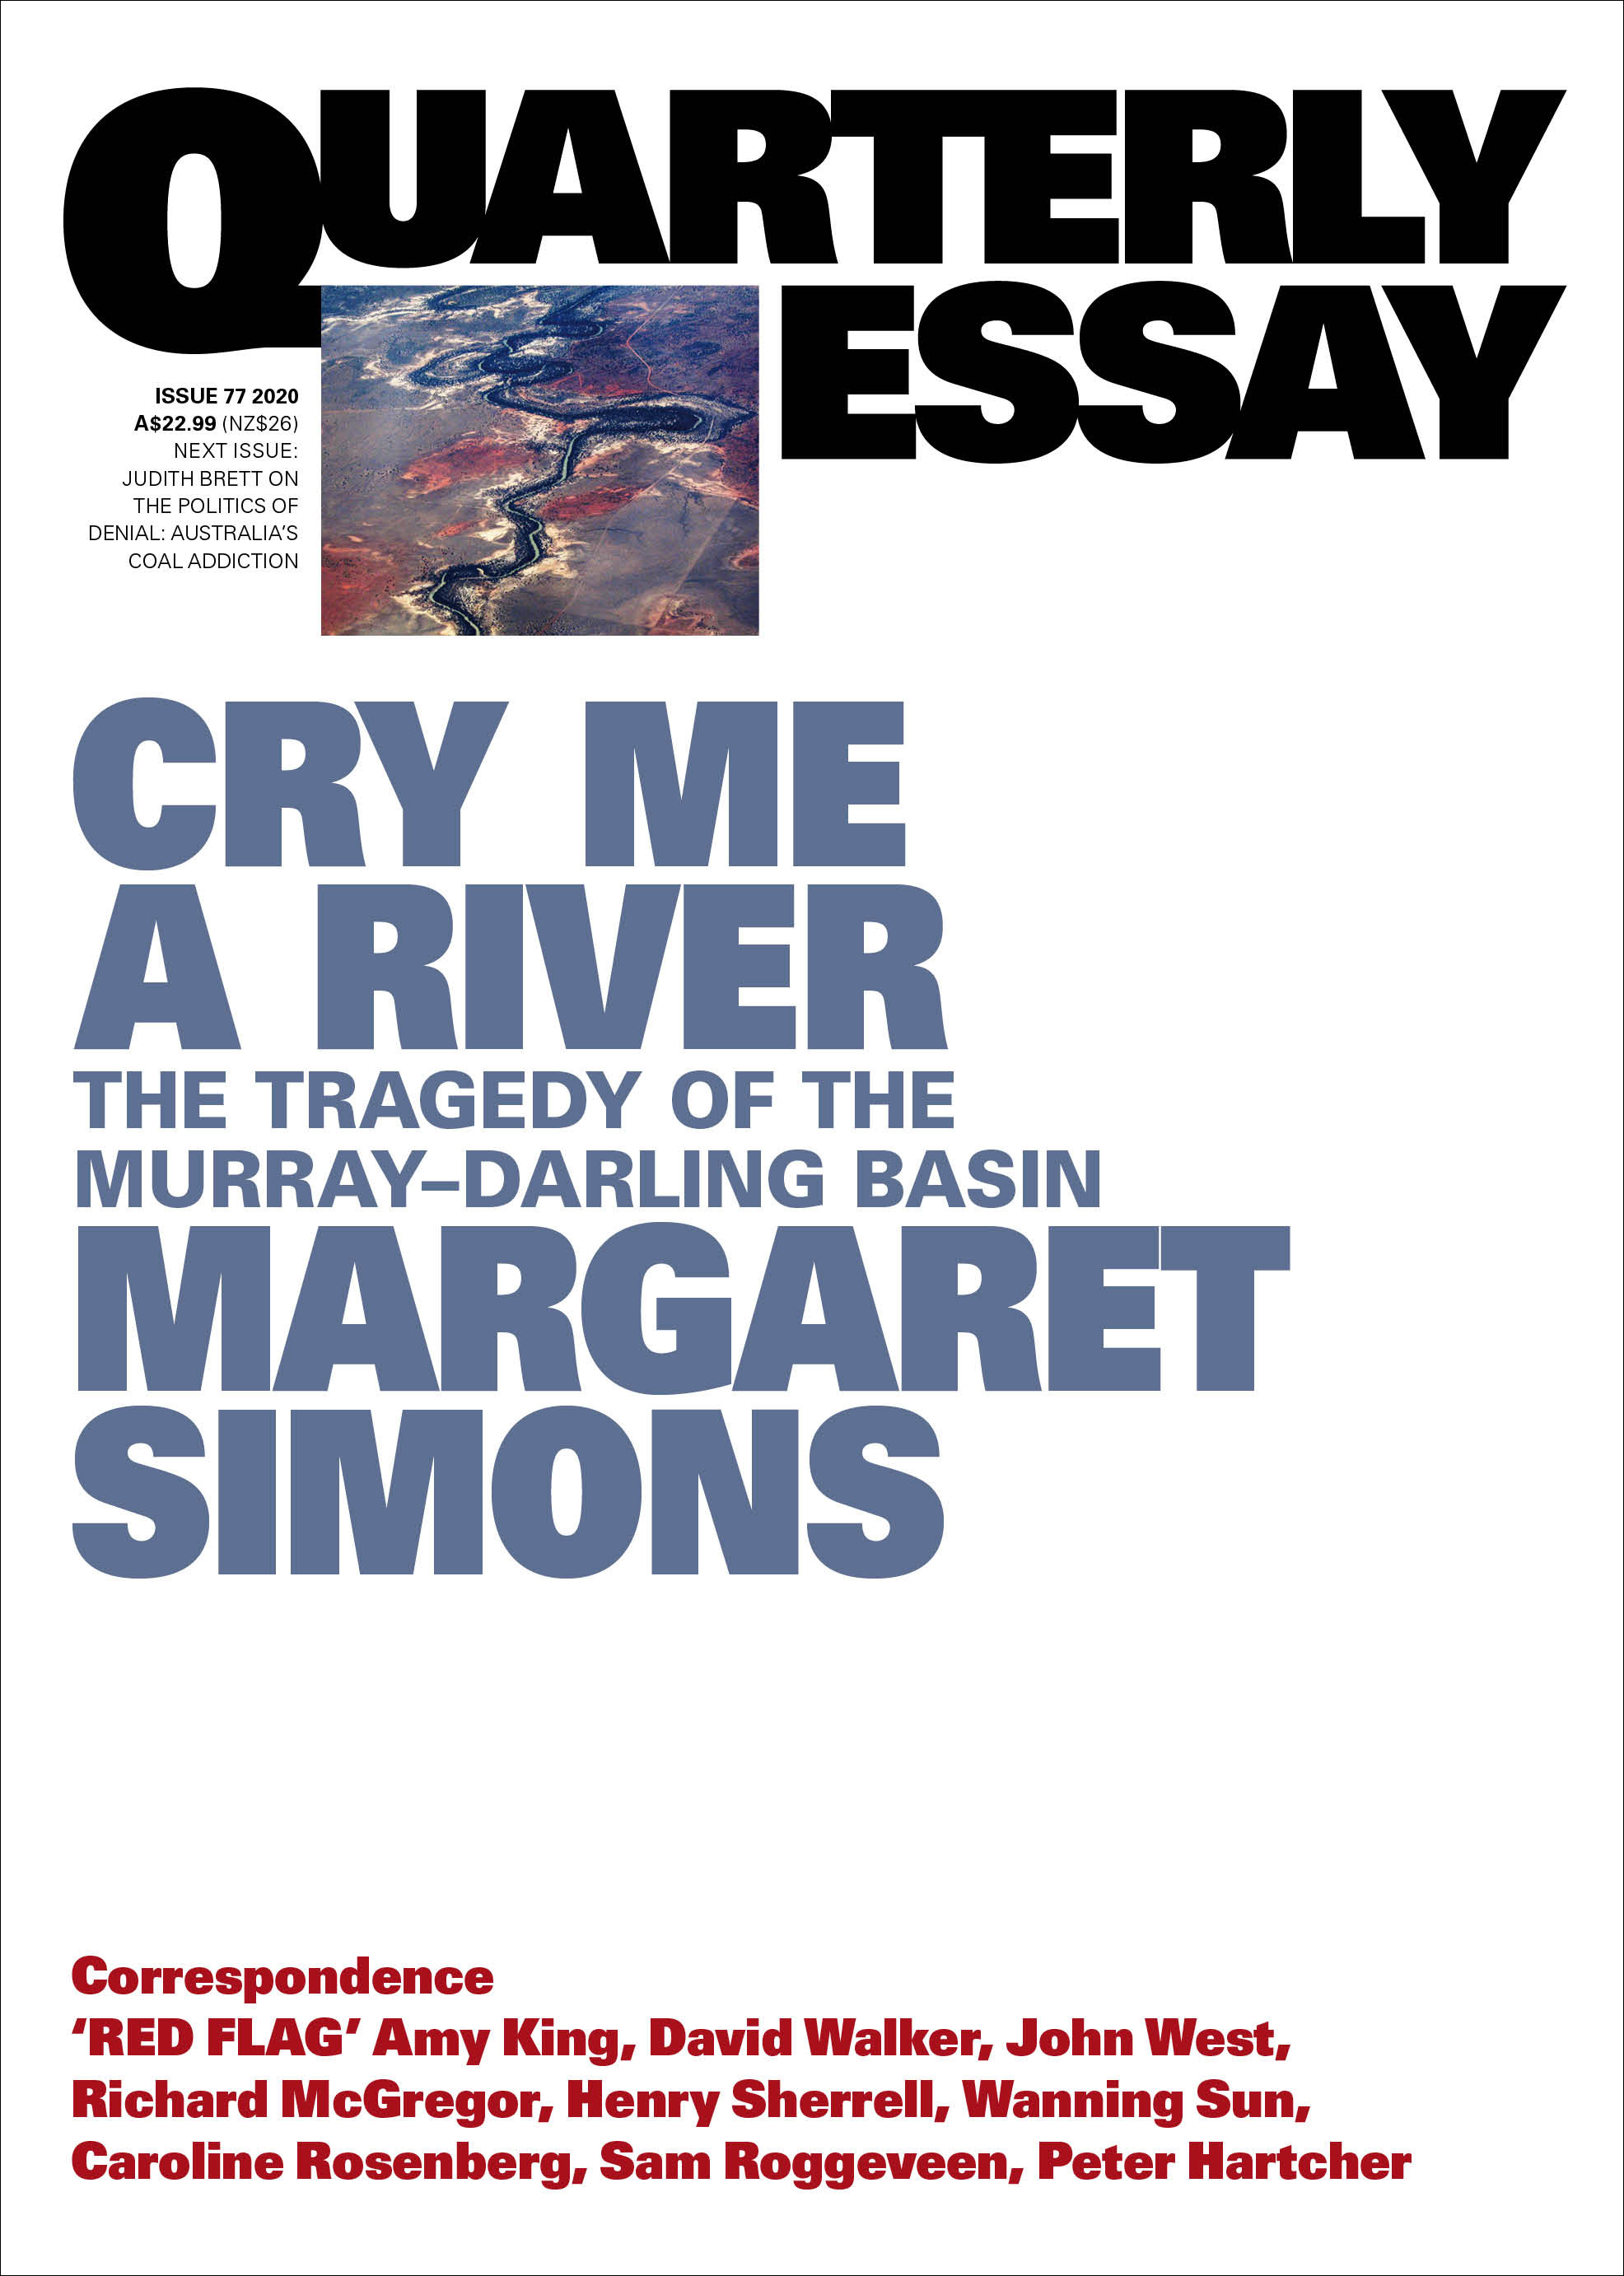 Cry Me A River Chapter 1 Cry Me a River by Margaret Simons | Black Inc.